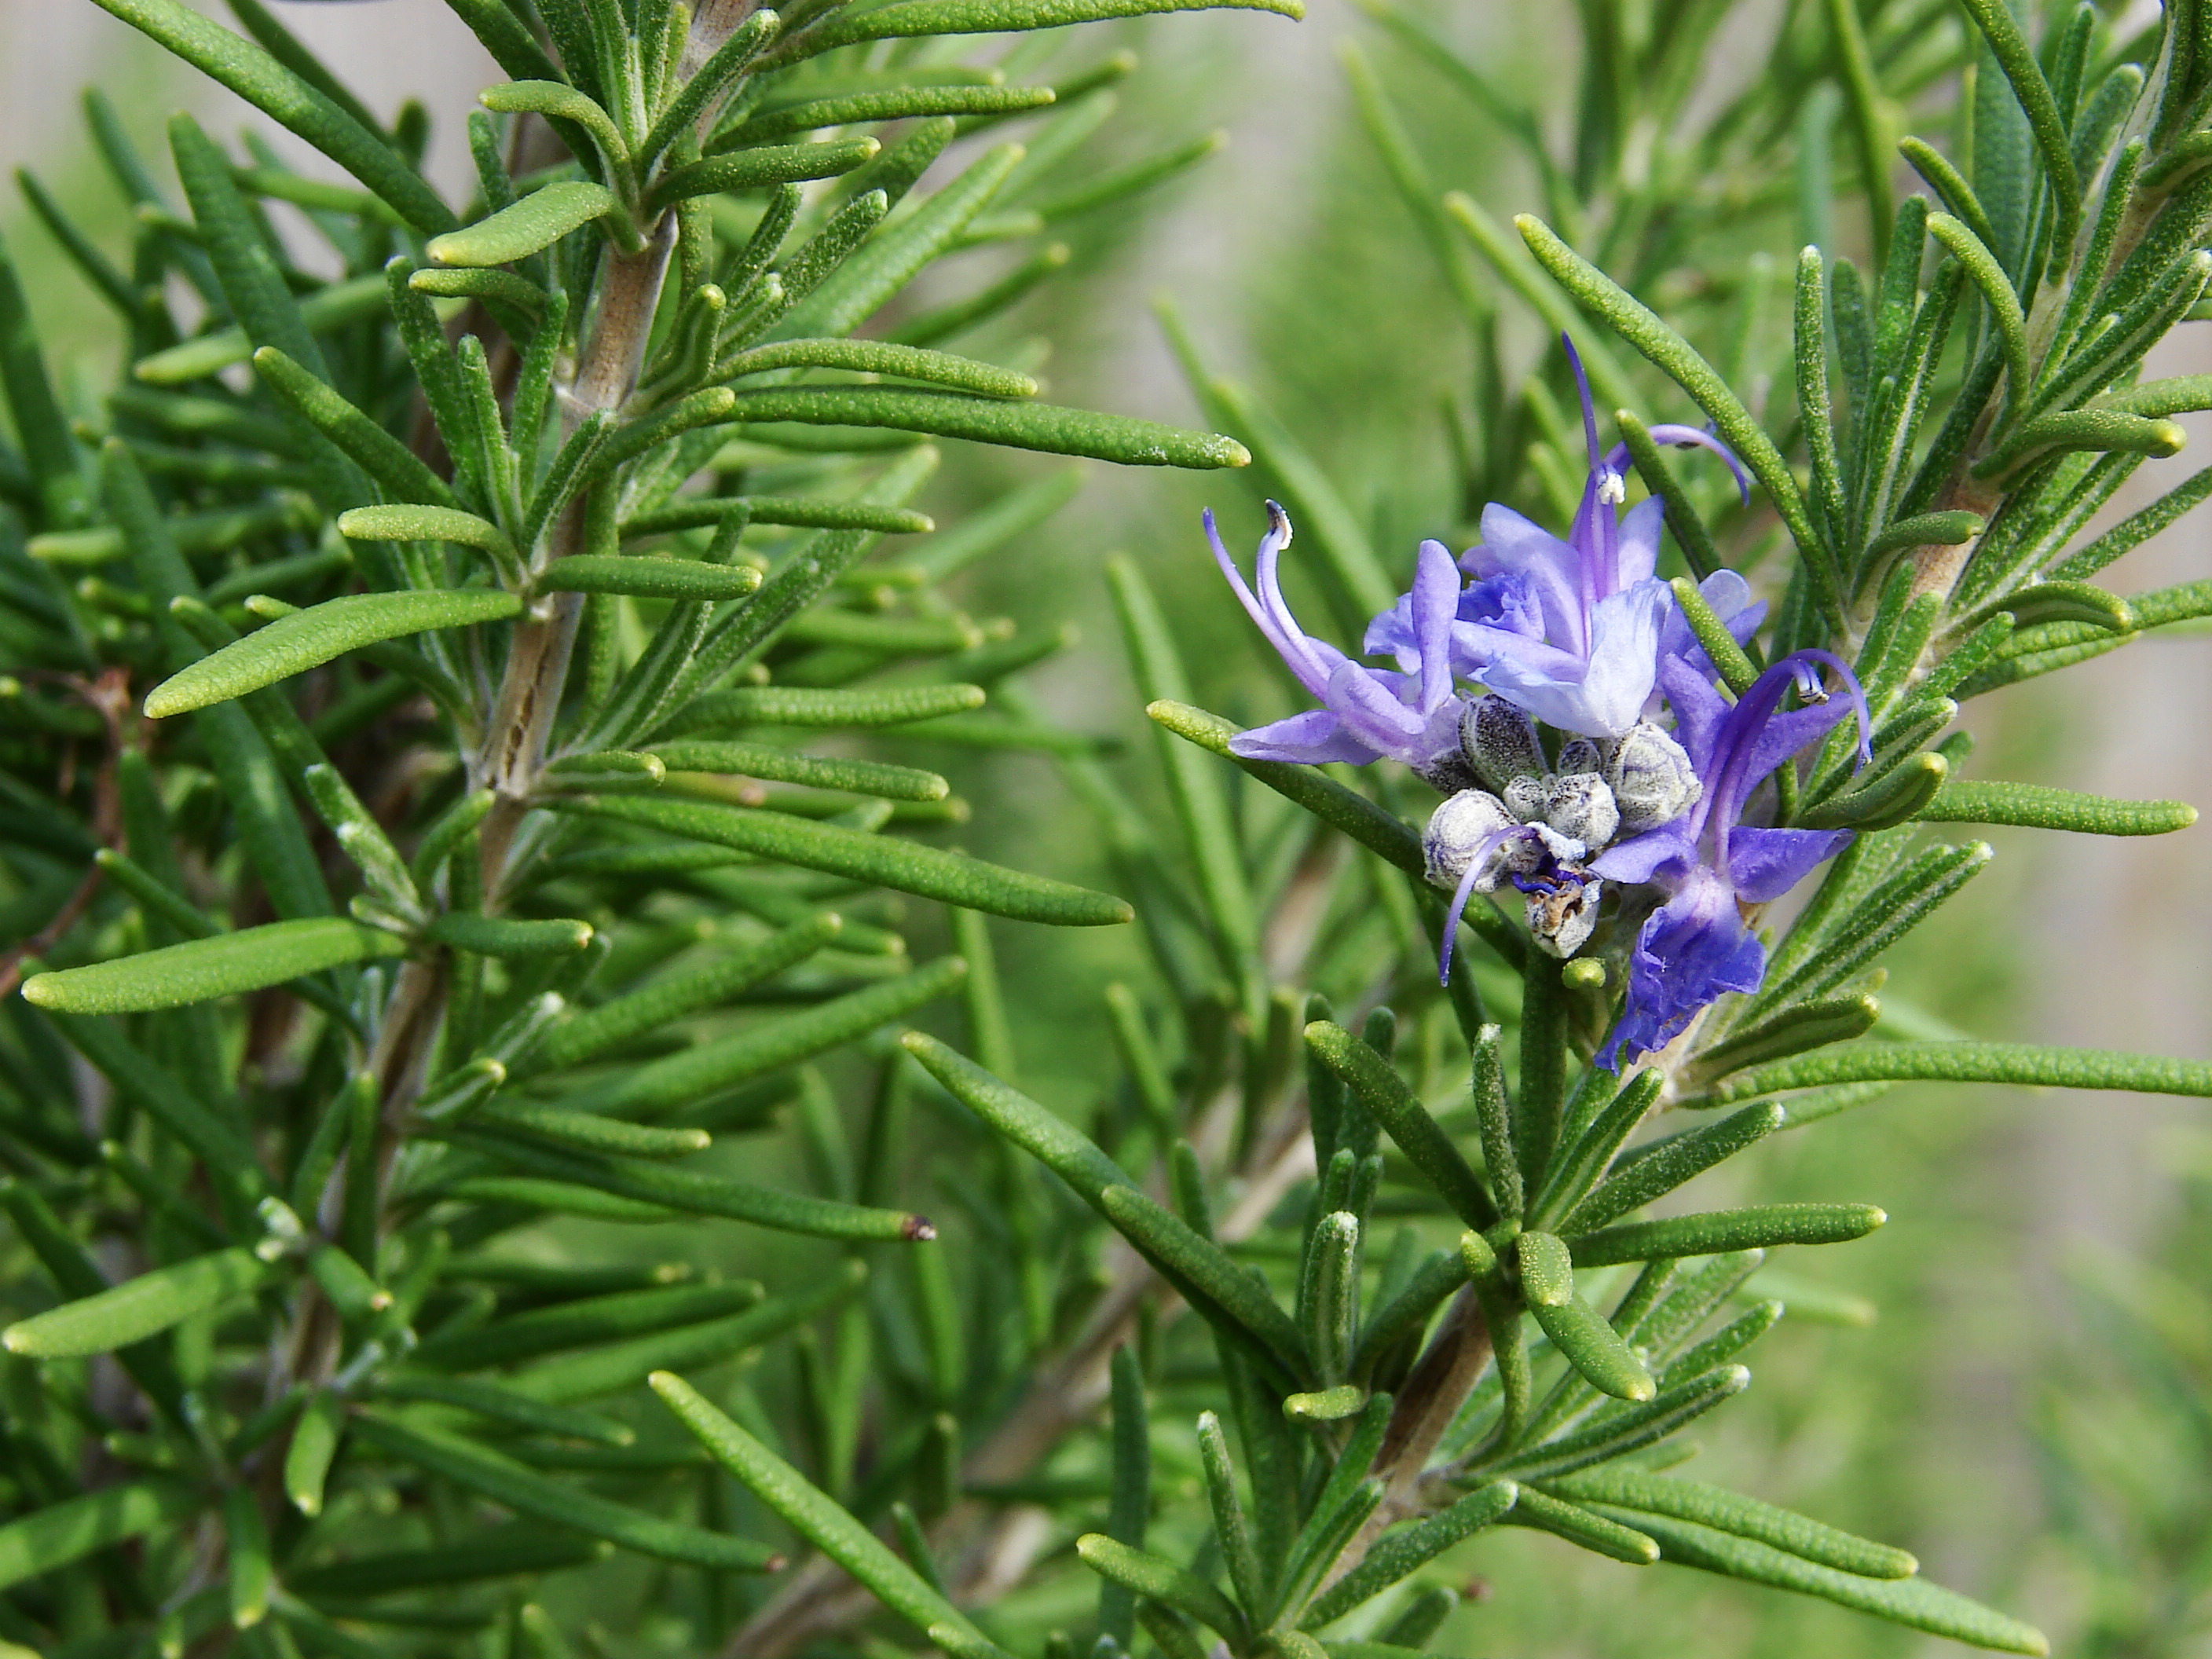 Don’t worry anymore about those pesky bugs, try some of these mosquito repelling plants! You will love having rosemary in your backyard! 